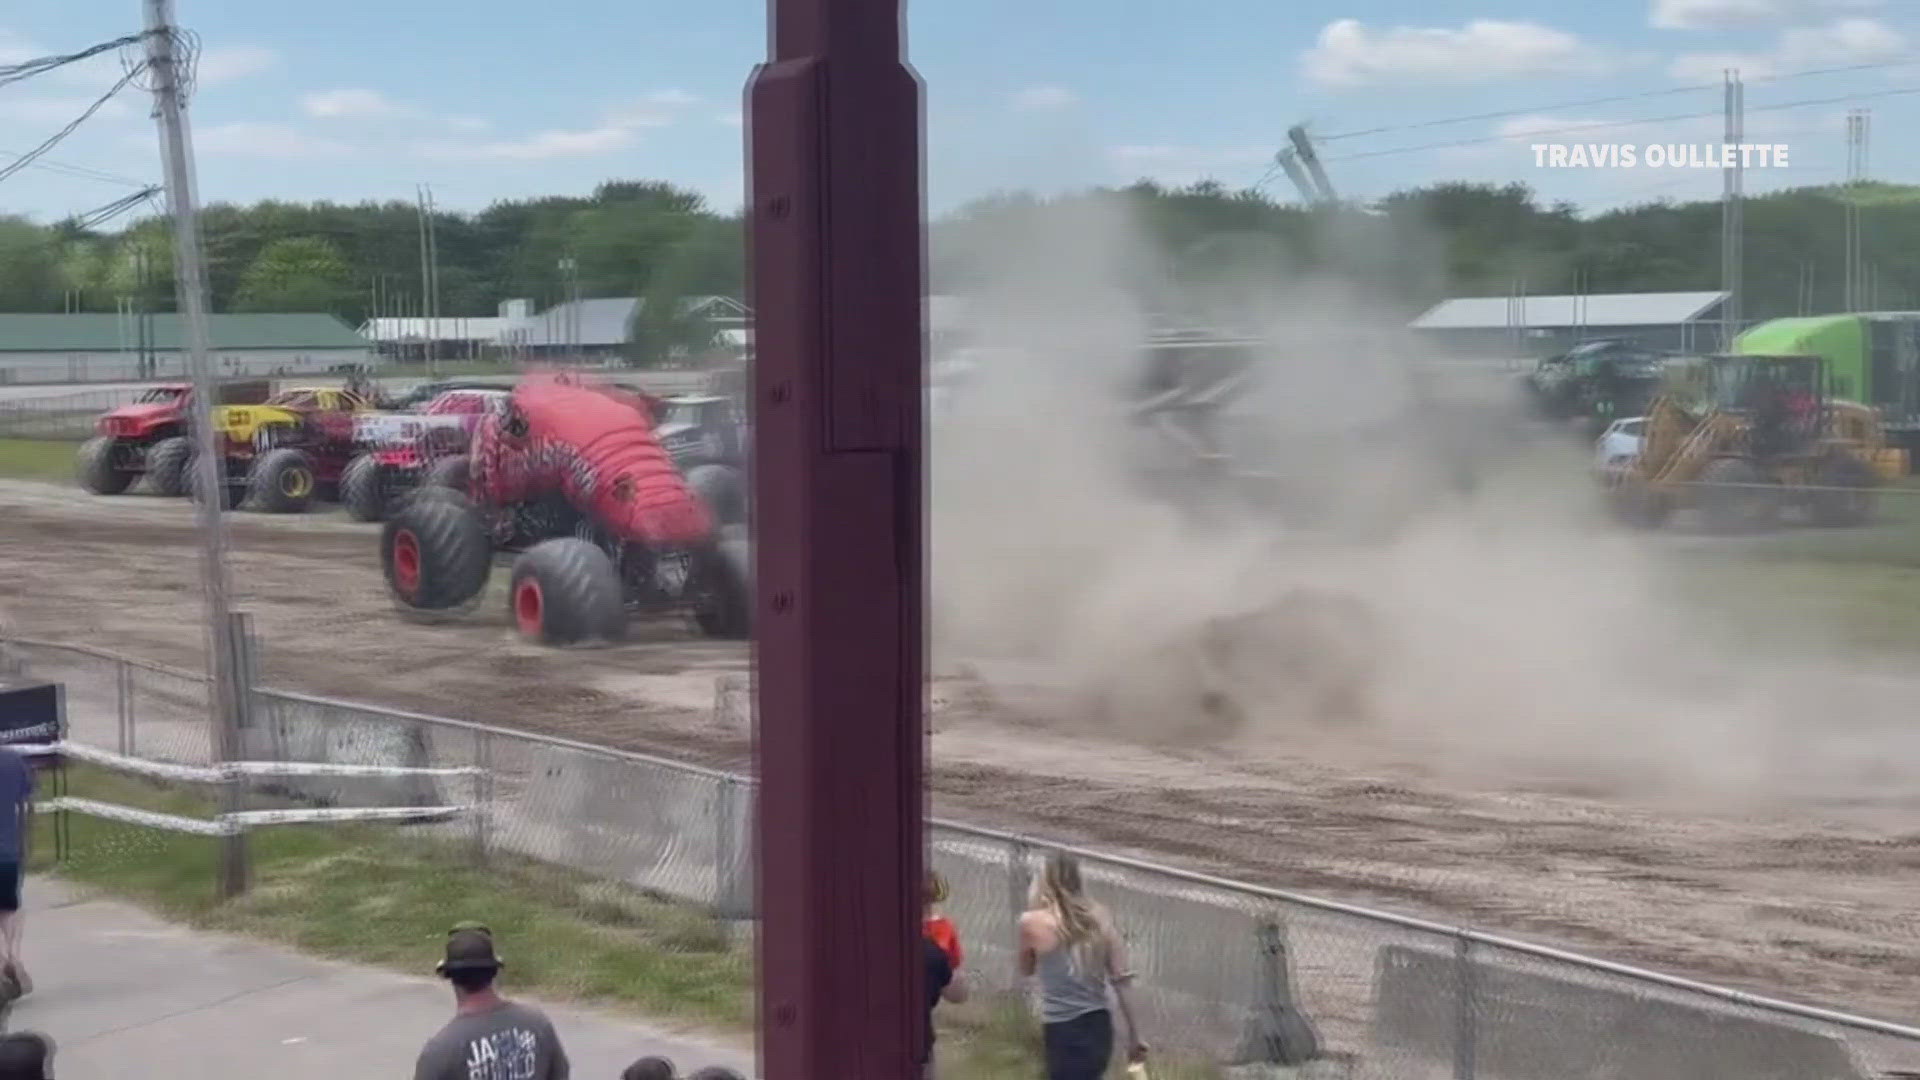 A monster truck went over a jump and hit an aerial utility wire that was across the race track. The wire got stuck on the truck, pulling down several utility poles.